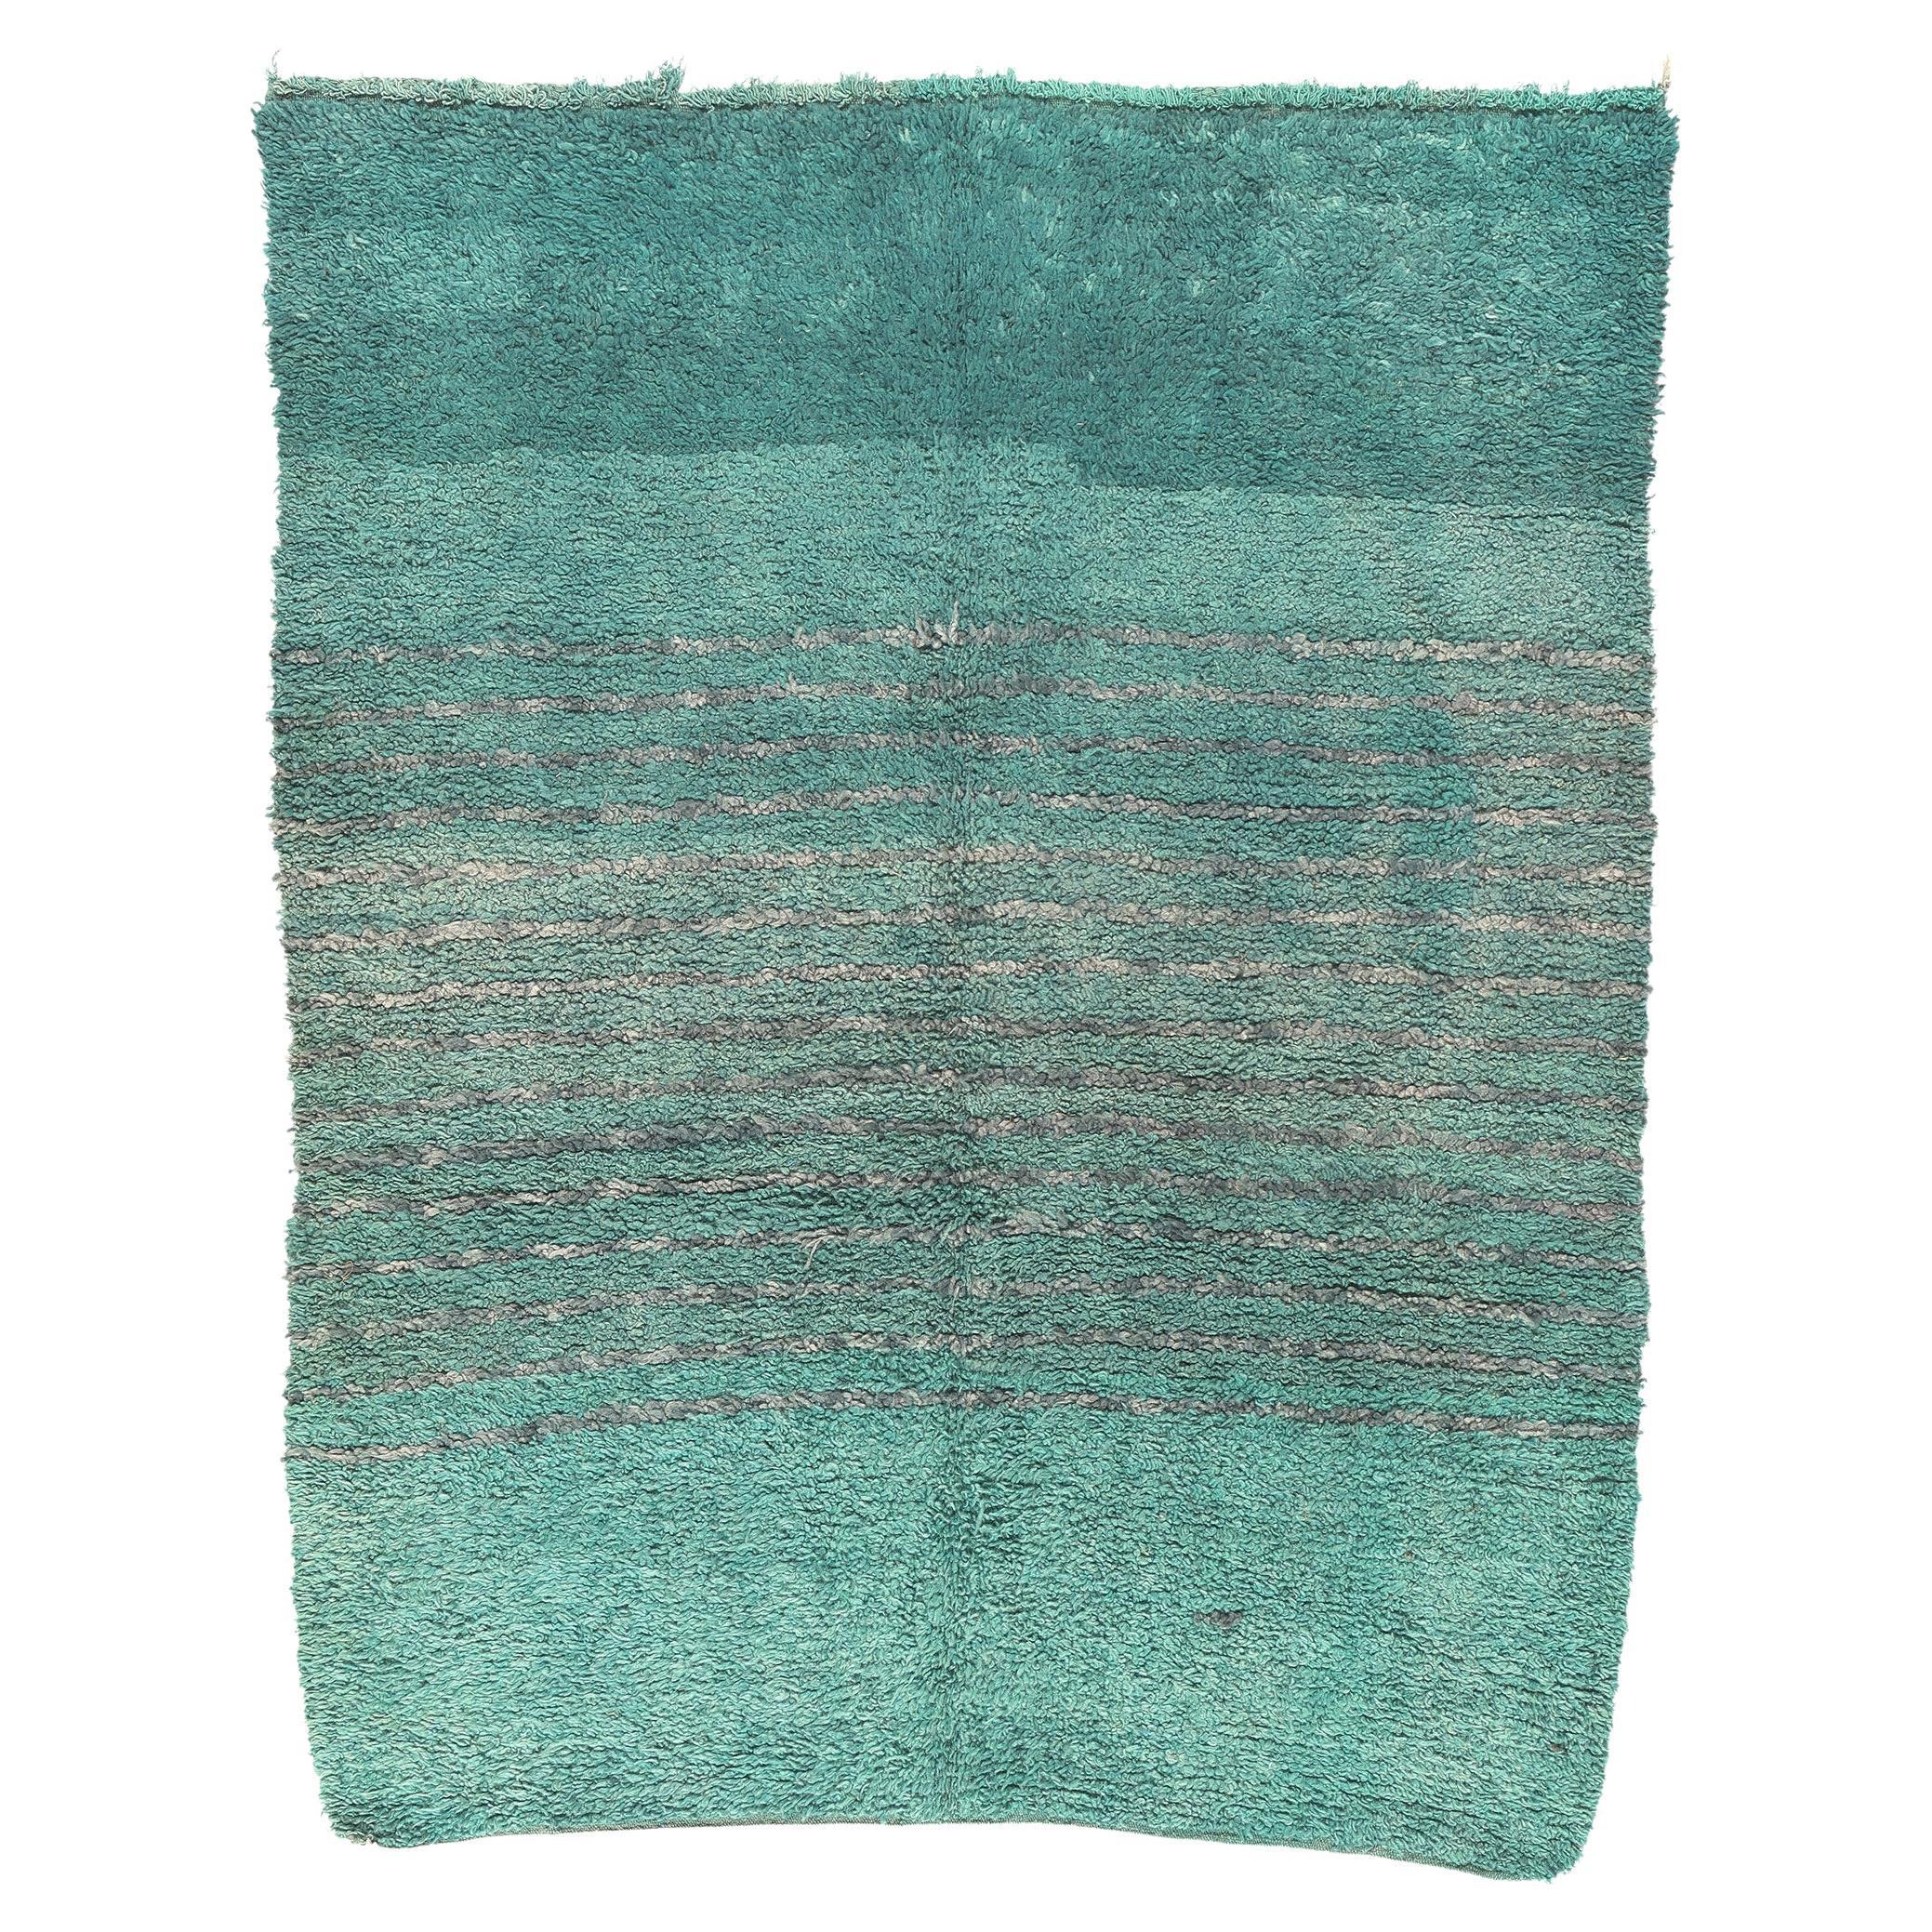 Vintage Beni Mrirt Moroccan Rug, Teal Tranquility Meets Cozy Hygge For Sale